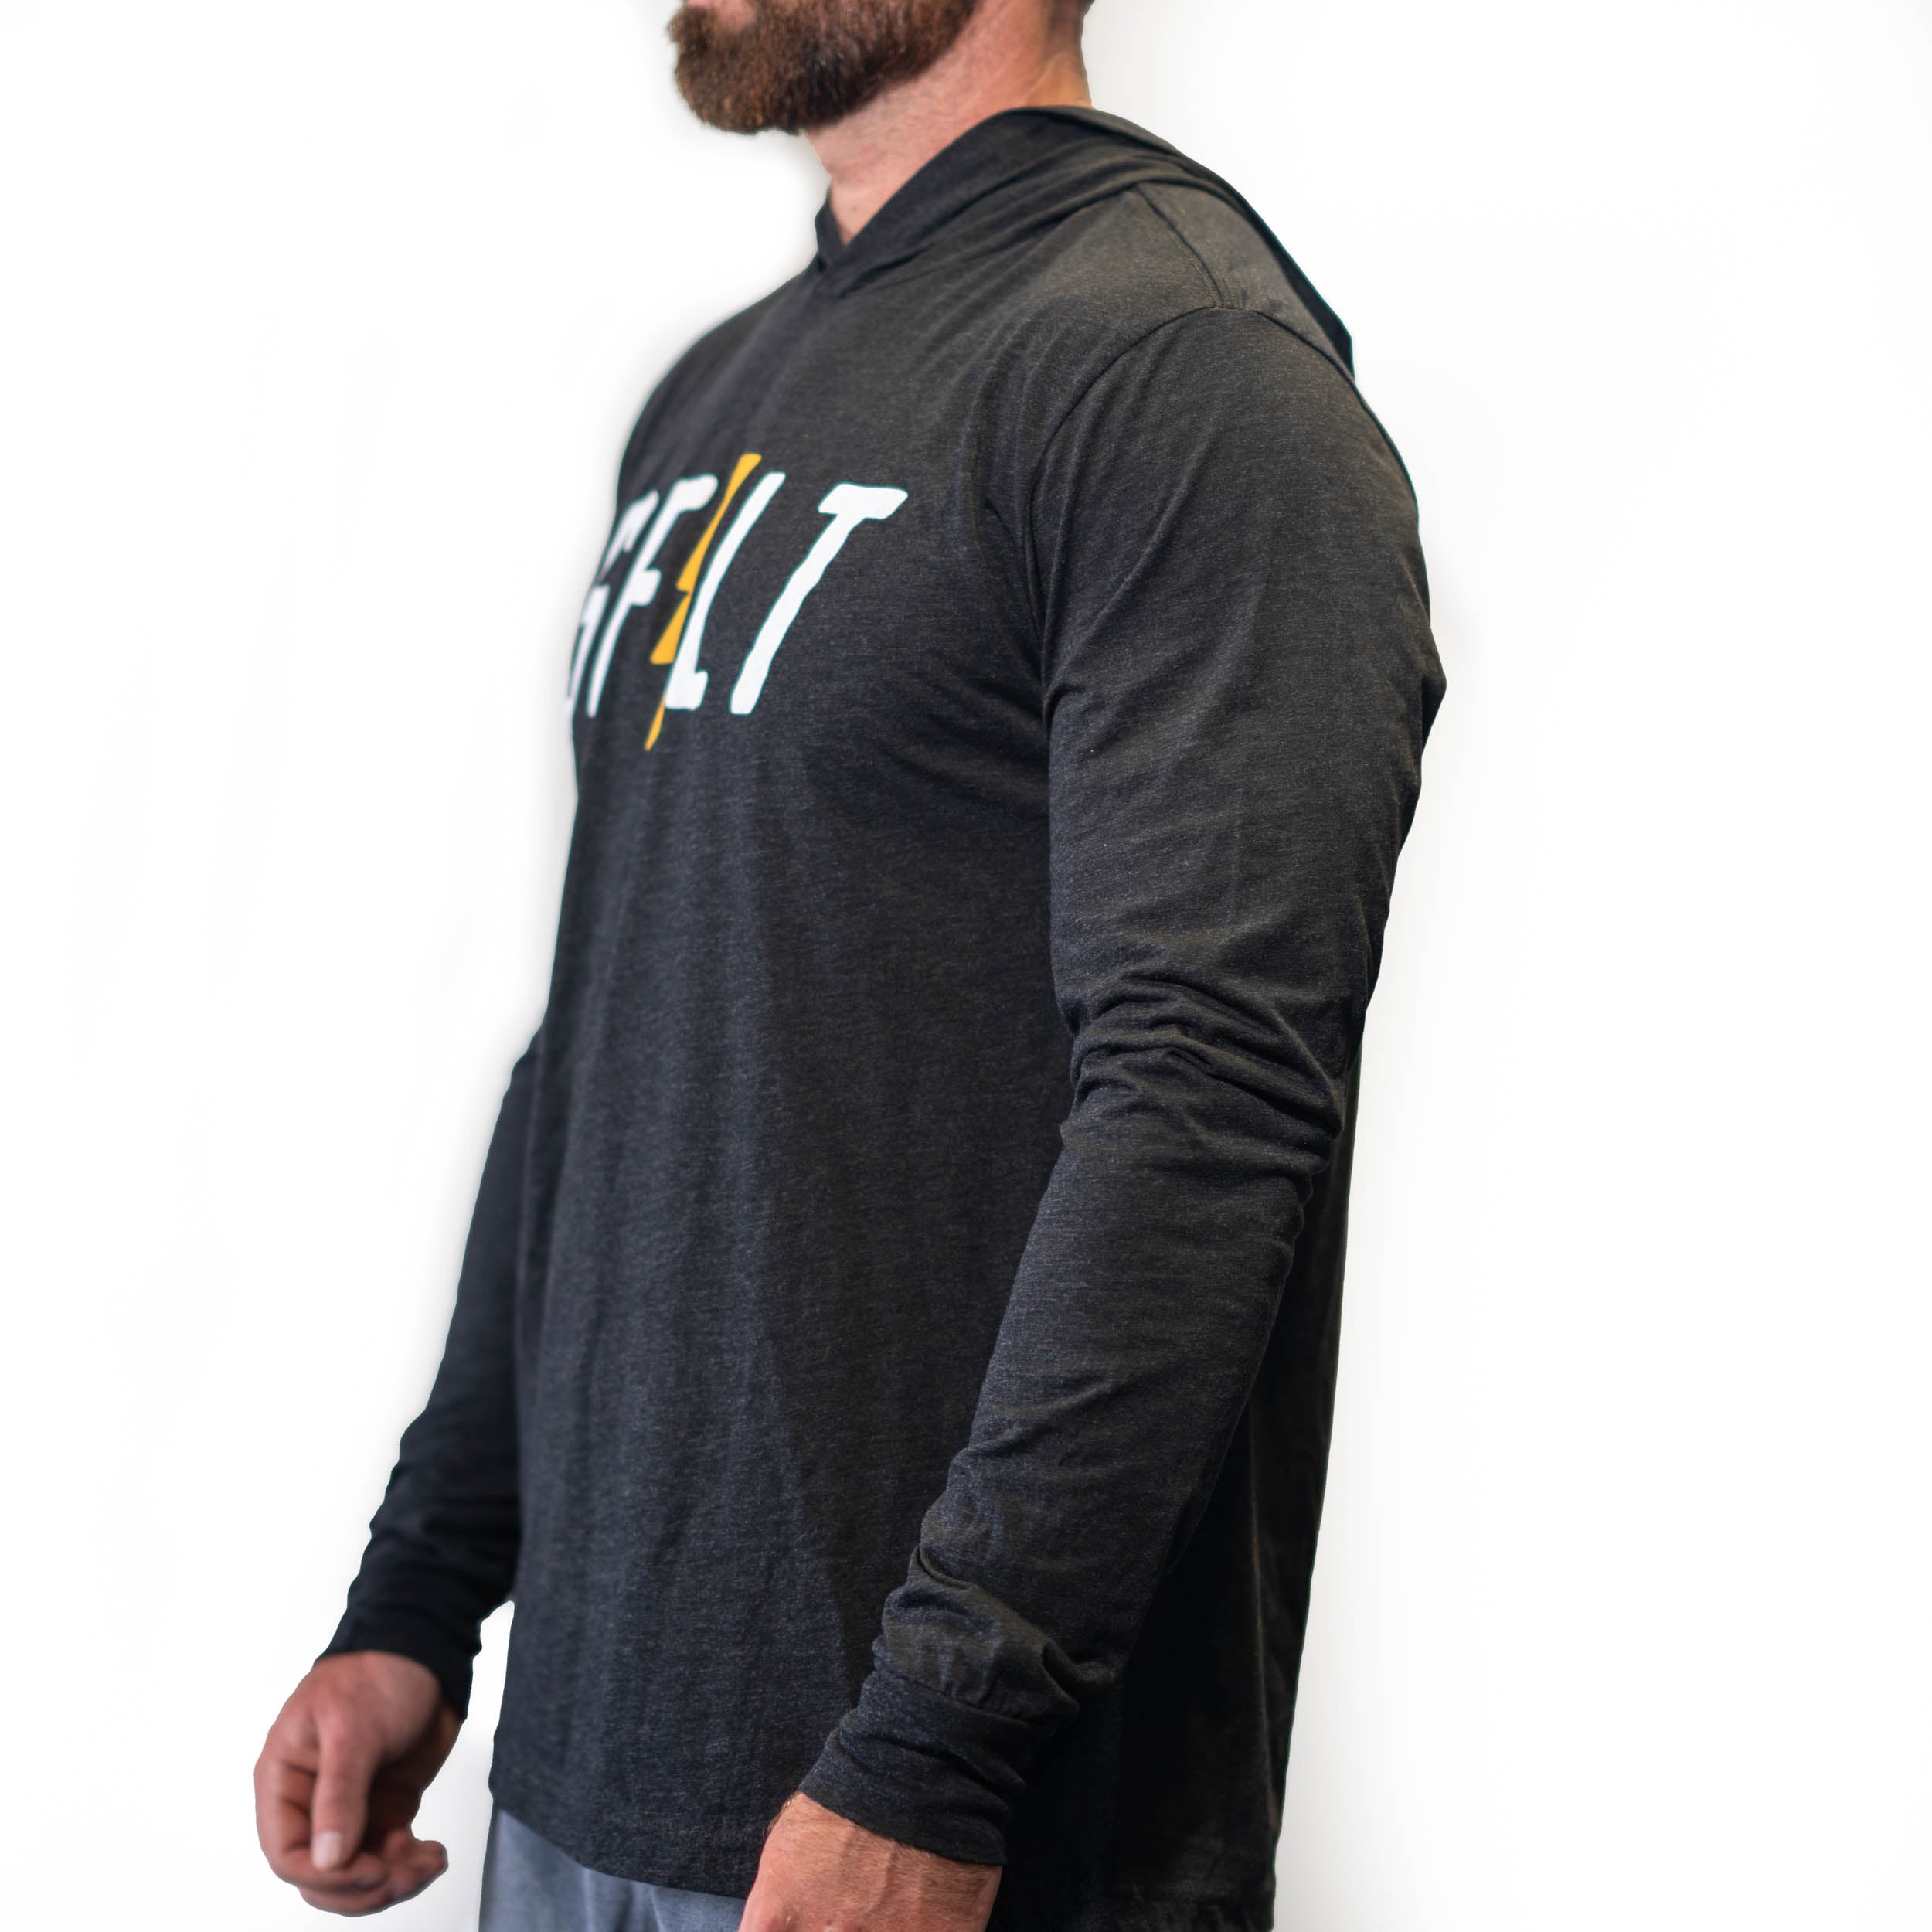 Pump Covers for Men, Oversized Hoodies & T-shirts